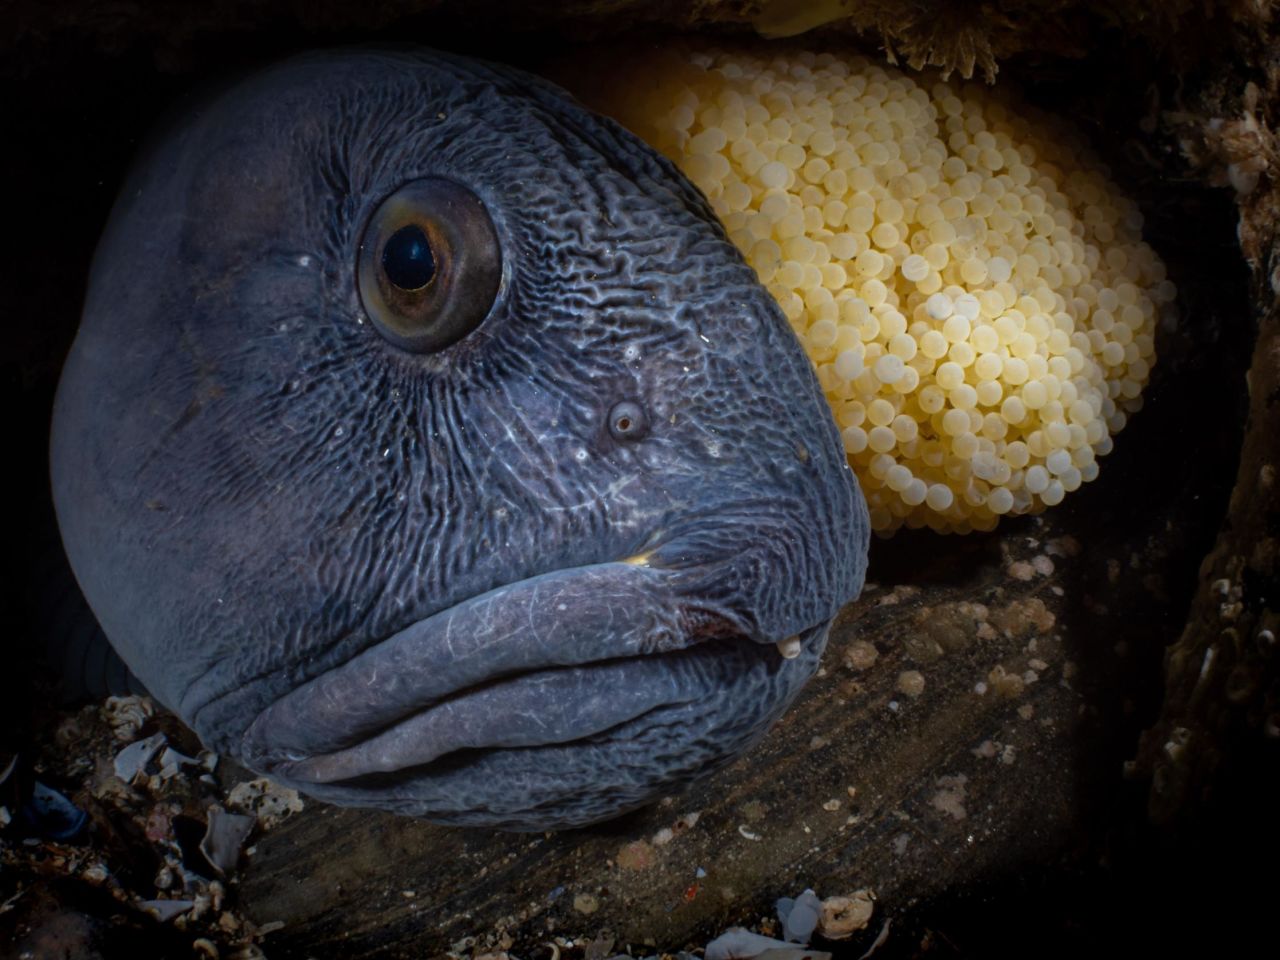 This male Atlantic Wolfish from Norway is protecting its partner's eggs until spring. The photo by Galice Hoarau won first prize in the Marine Life Behavior category.